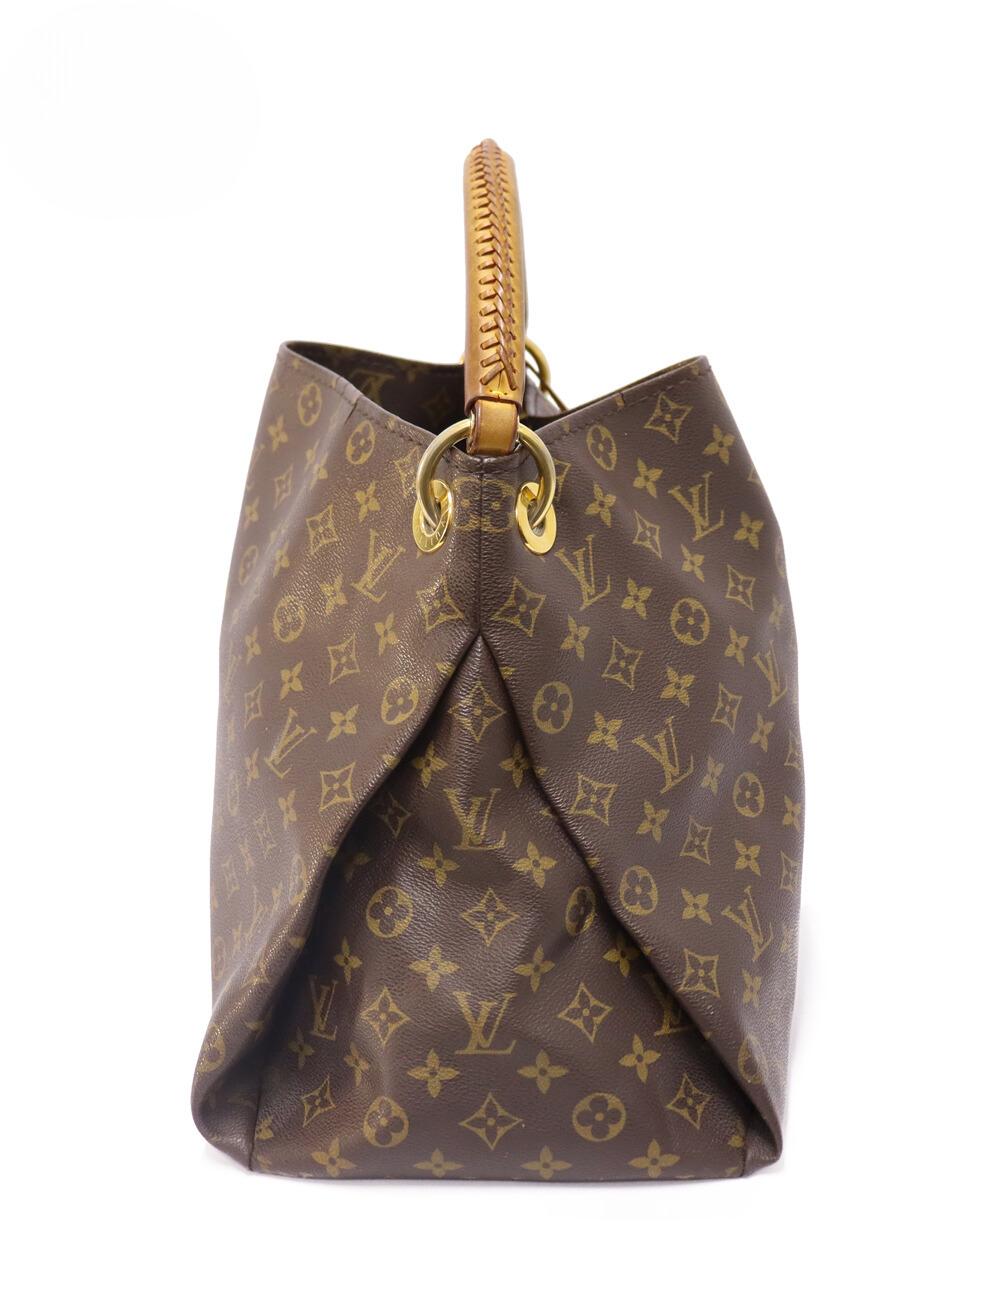 Louis Vuitton Monogram Artsy MM, Features cross-stitched top handle for shoulder, zip and slip pockets, and protective feet at base.

Material: Leather
Hardware: Gold
Height: 32cm
Width: 41.5cm
Depth: 19cm
Handle Drop: 15cm
Overall condition: